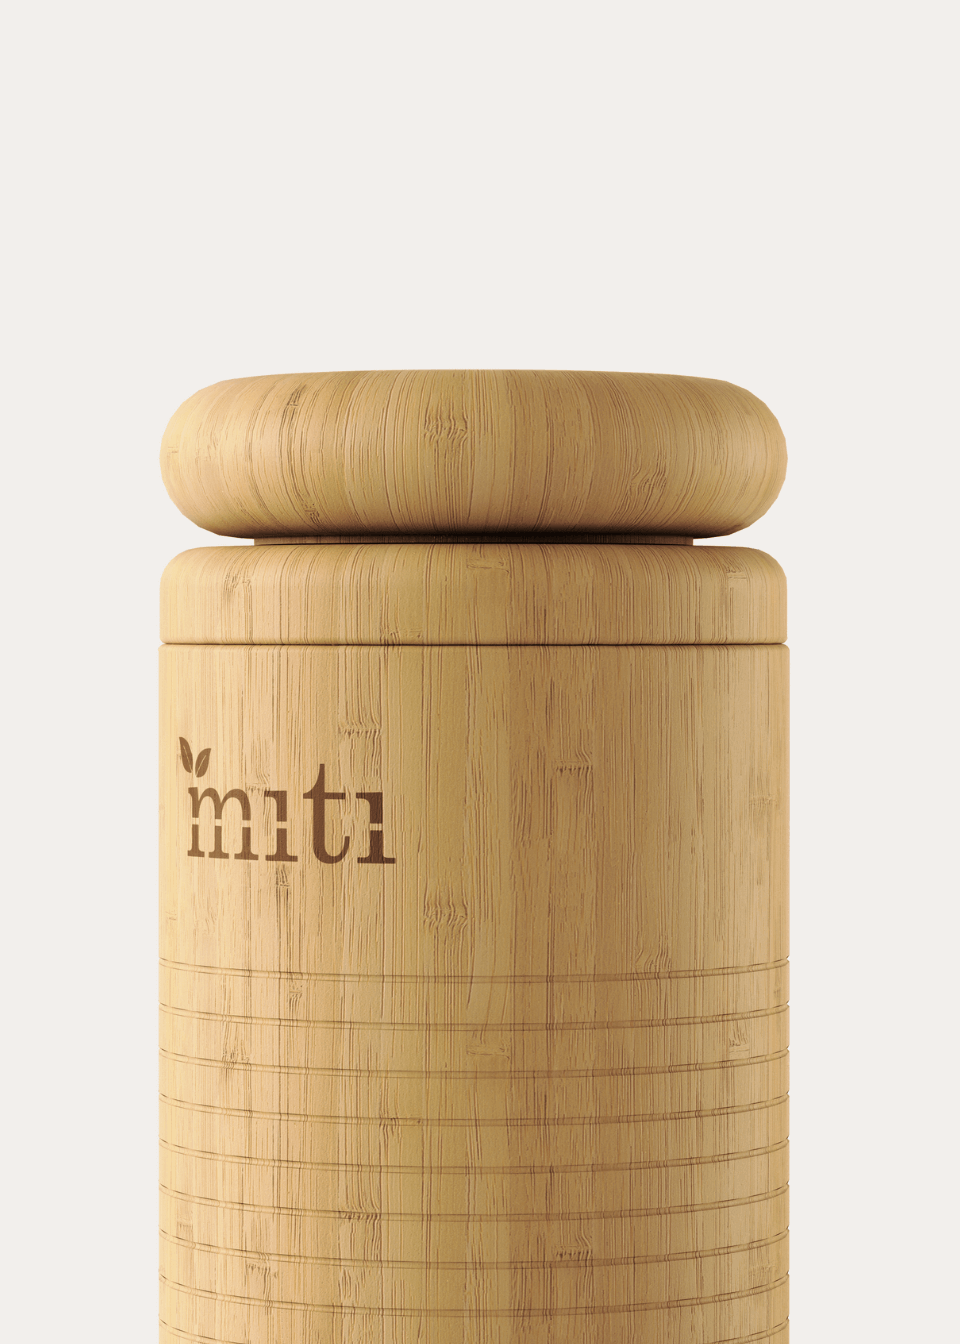 MITI Life's Bamboo Water Bottle with based screw top upper body captured photo